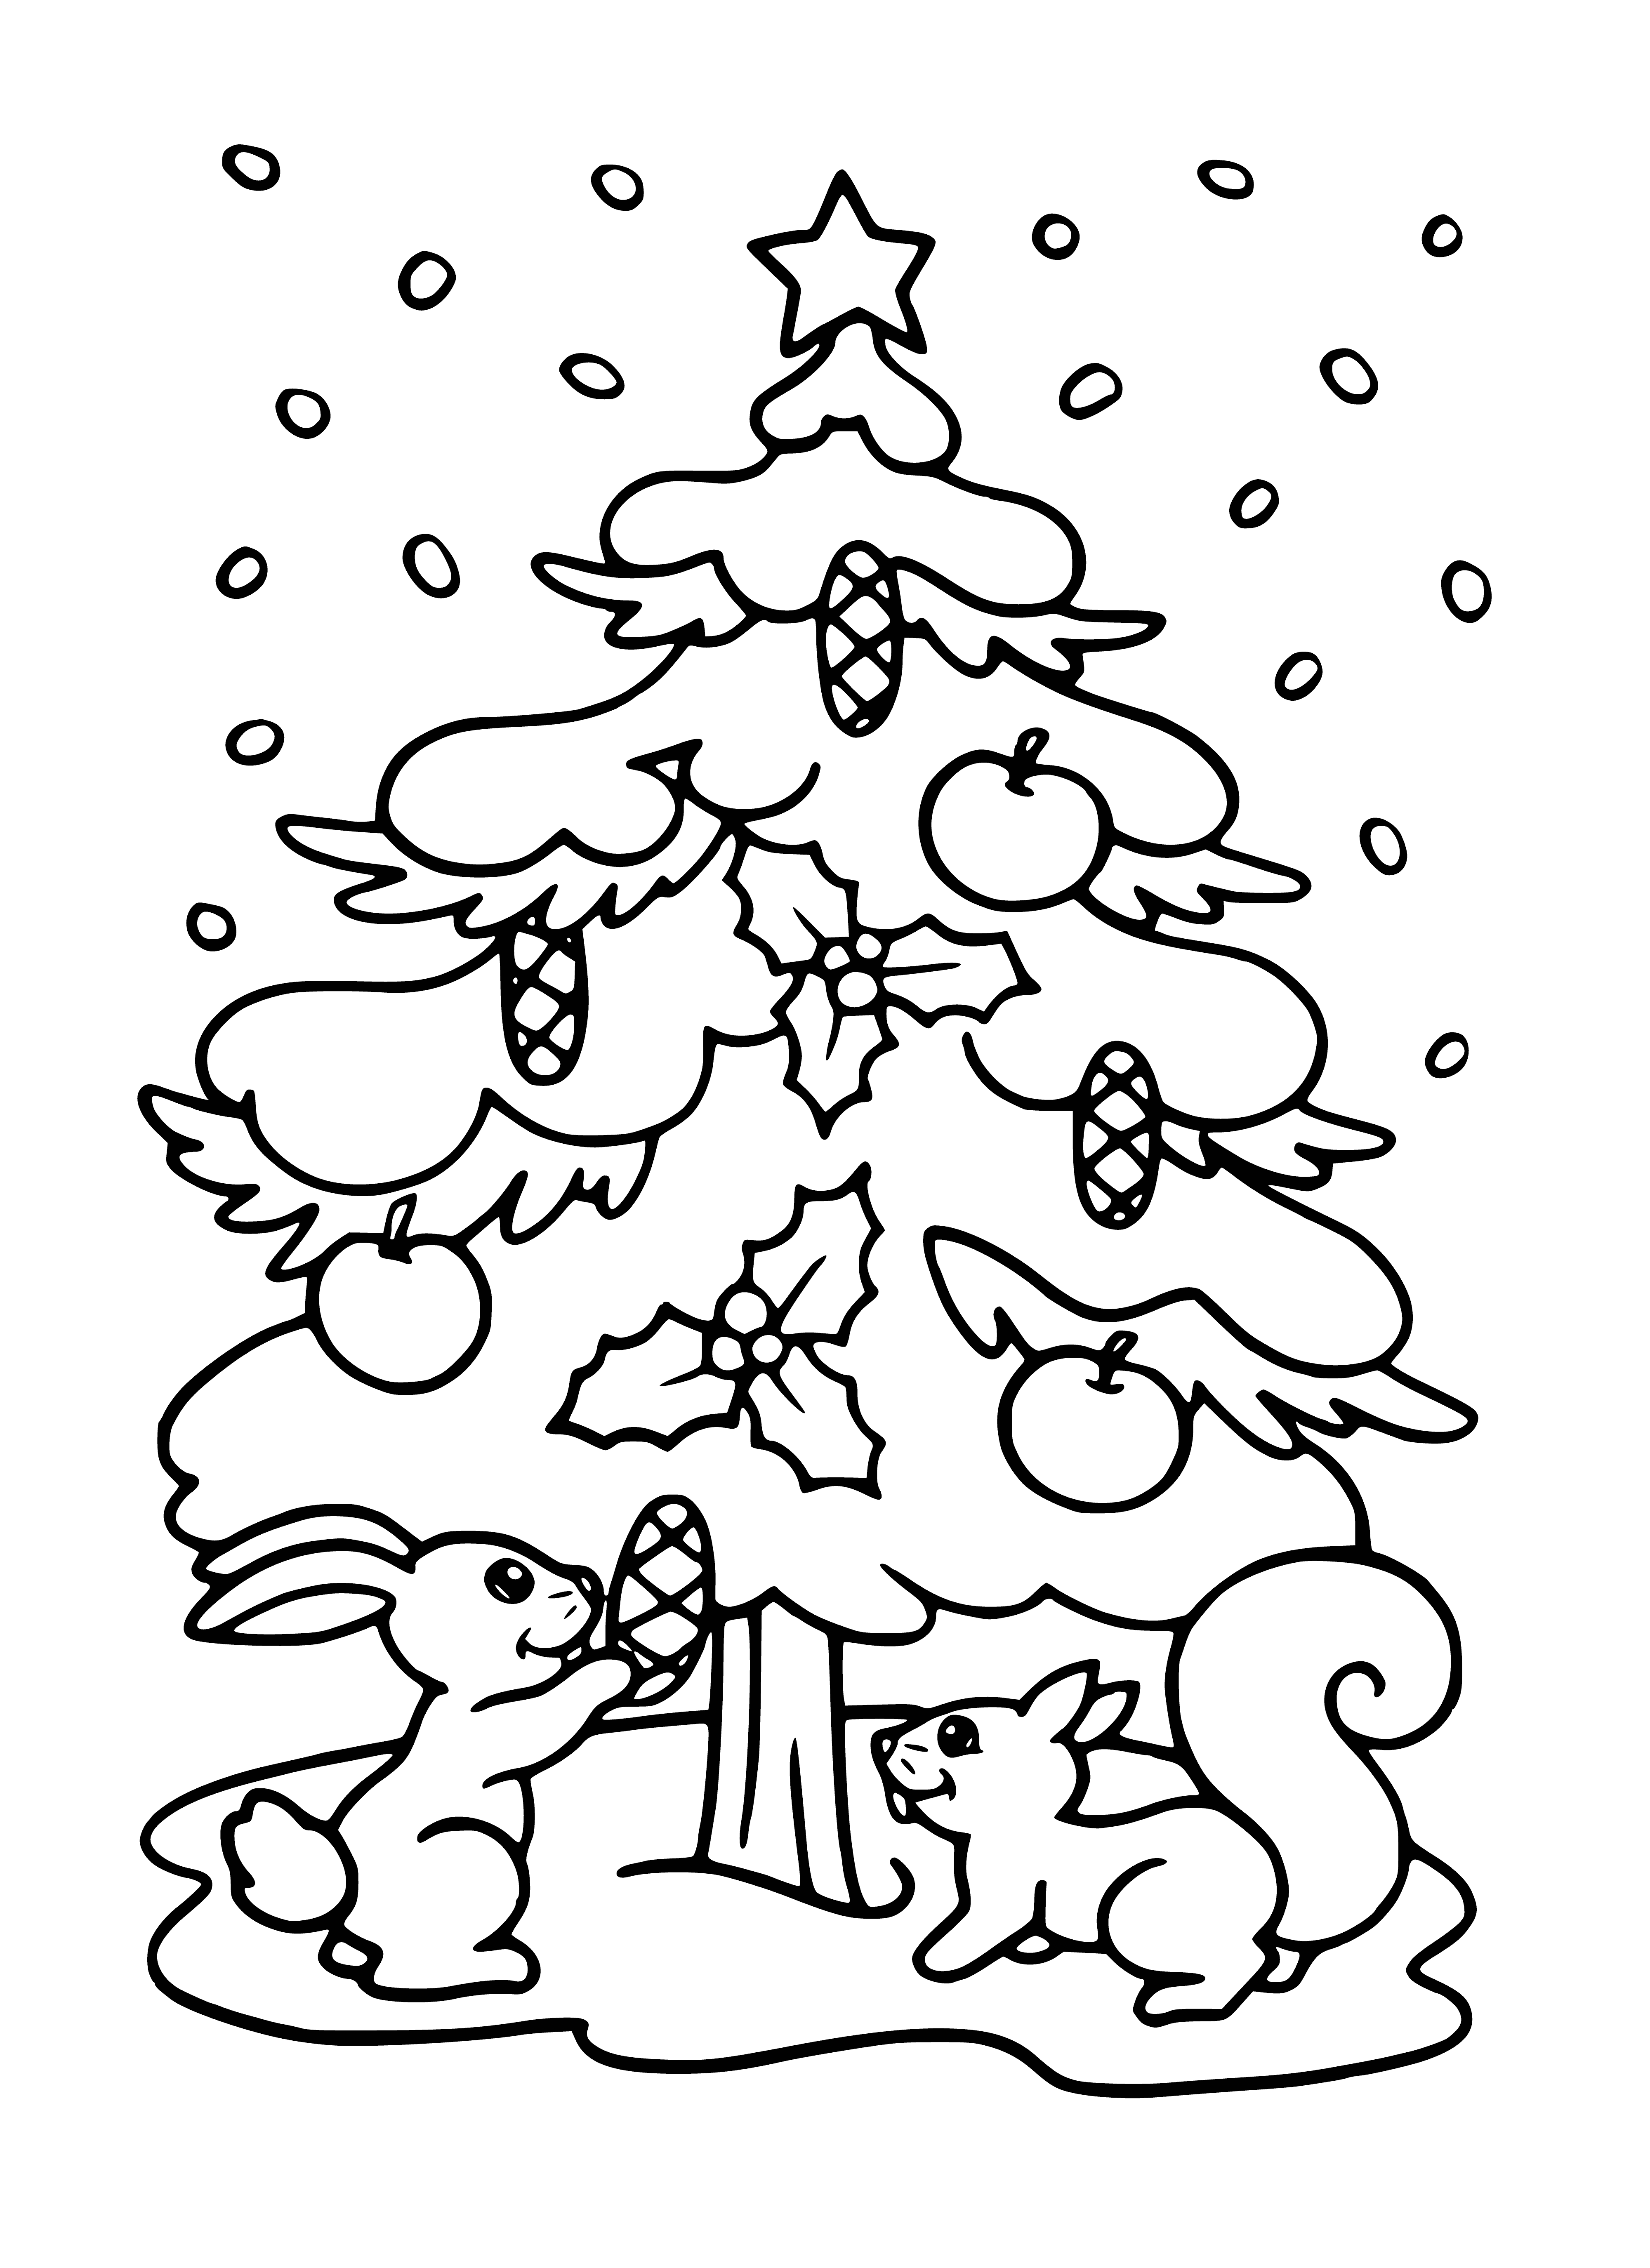 Squirrels play around a Christmas tree decorated with lights and ornaments in a festive coloring page.